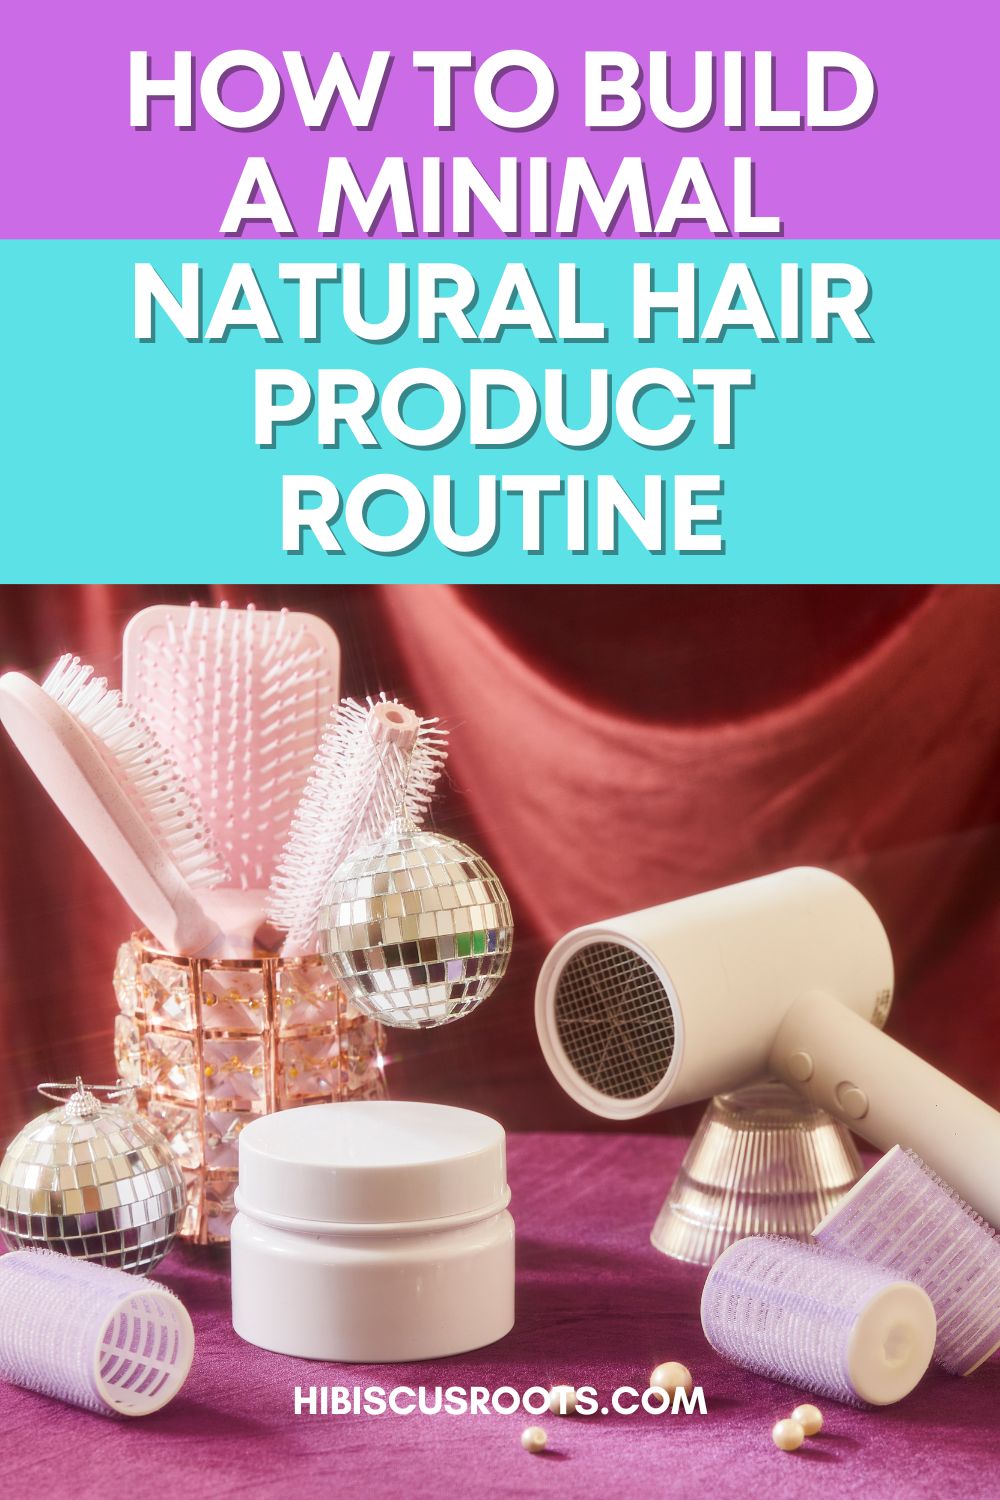 5 Steps To Slim Your Natural Hair Product Stash